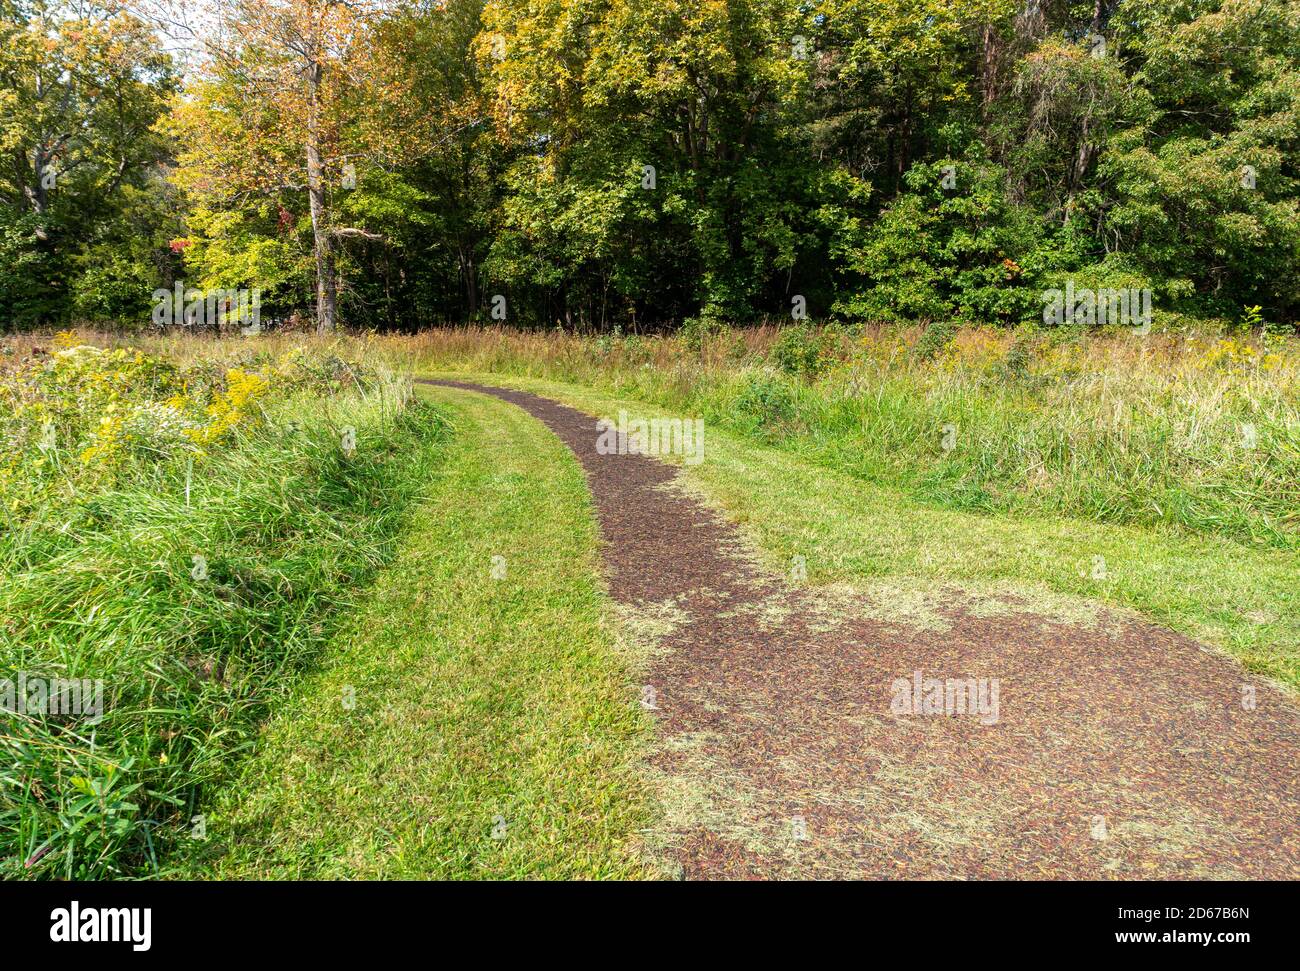 Wood chip walking path in a wooded area. Stock Photo